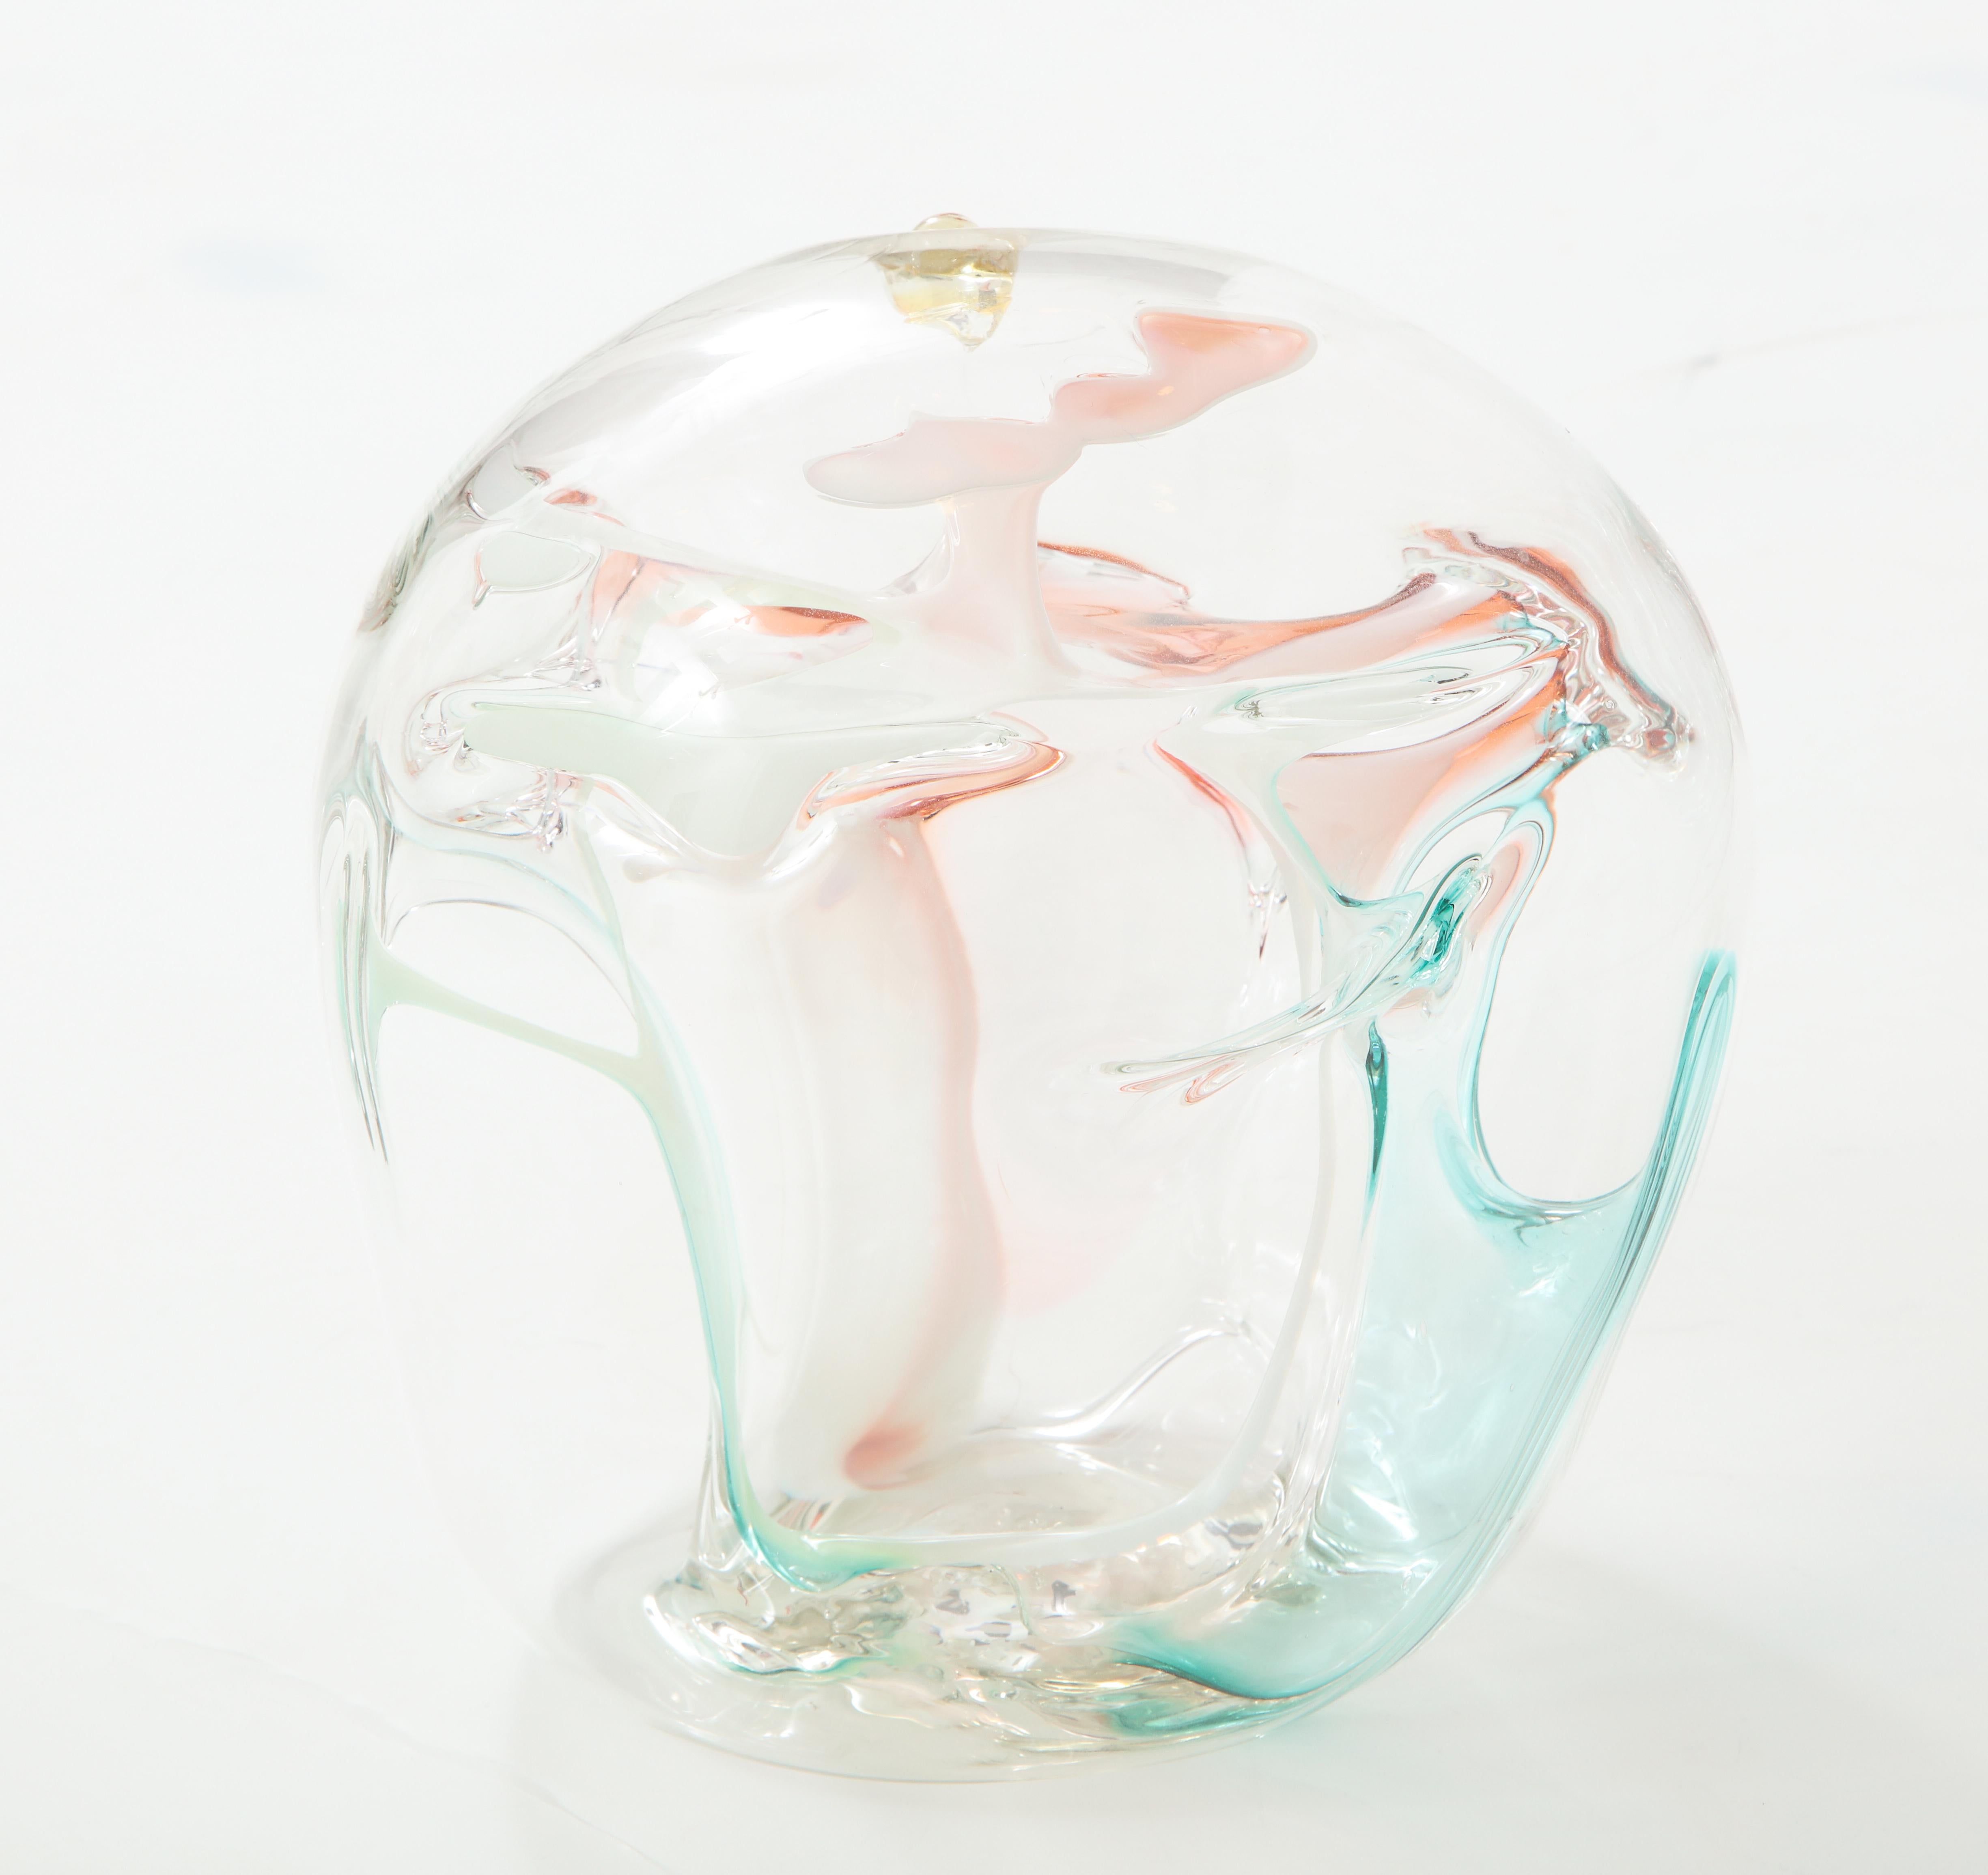 Multi-color hand blown glass sculpture with internal threads in pastel colors. 
The piece is signed and dated by Peter Bramhall.